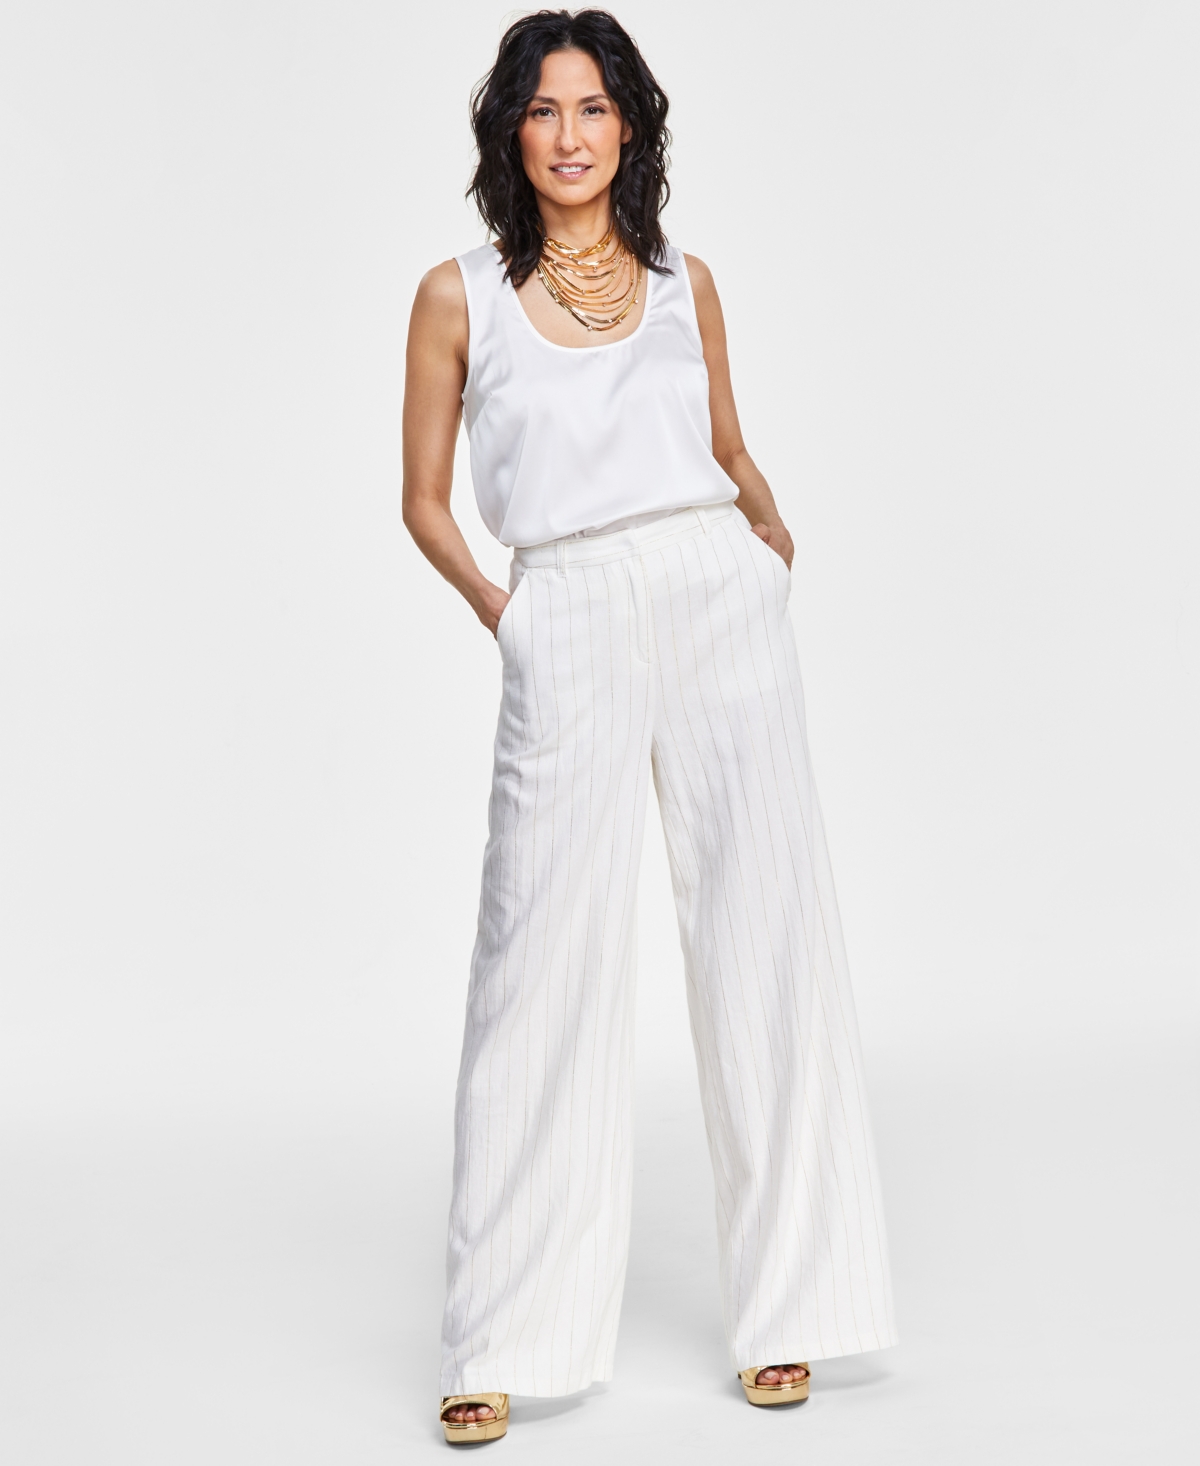 Women's Metallic Pinstripe Wide-Leg Trousers, Created for Macy's - Washed White